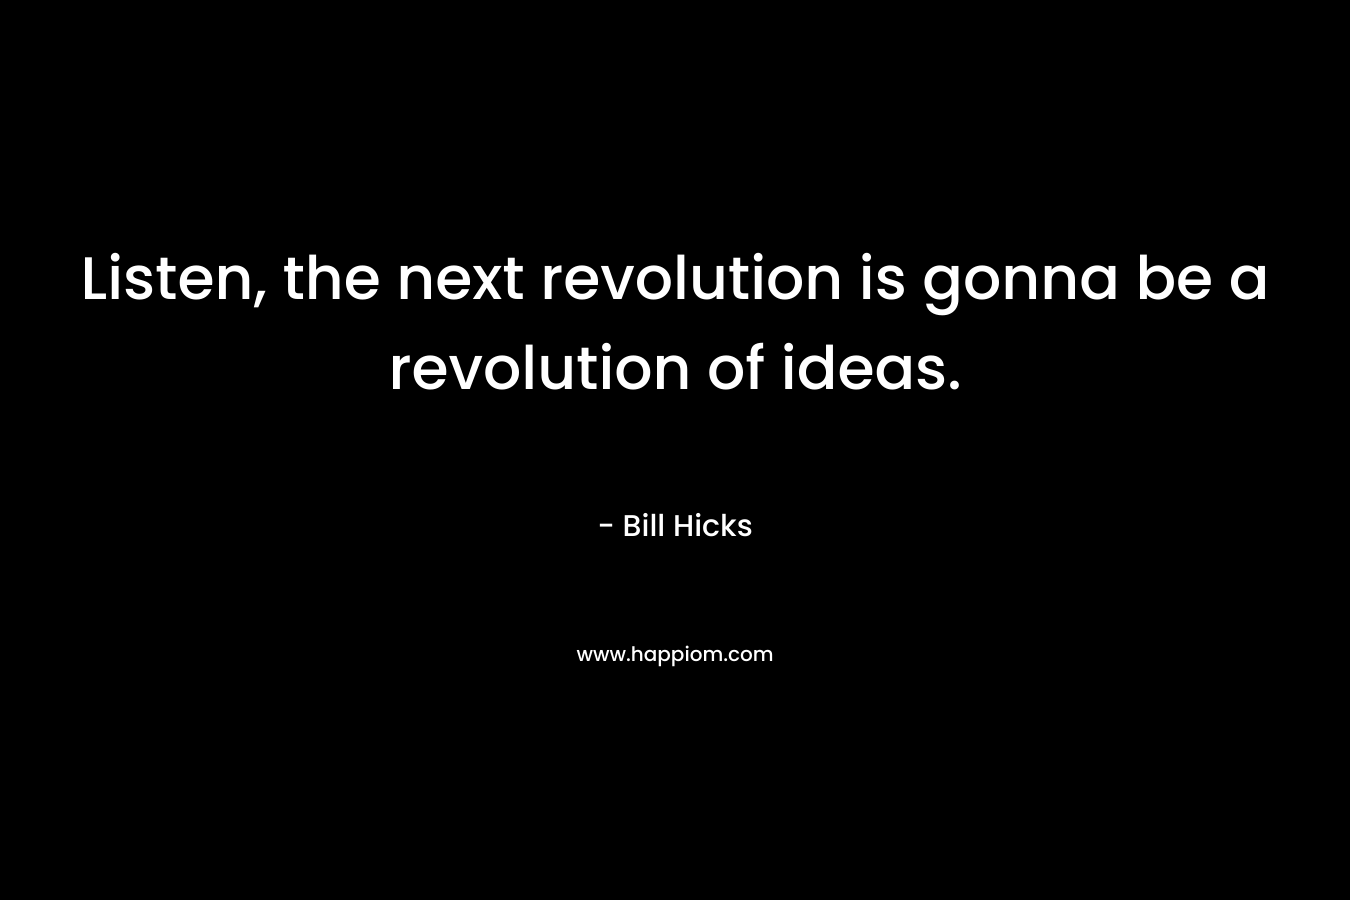 Listen, the next revolution is gonna be a revolution of ideas.